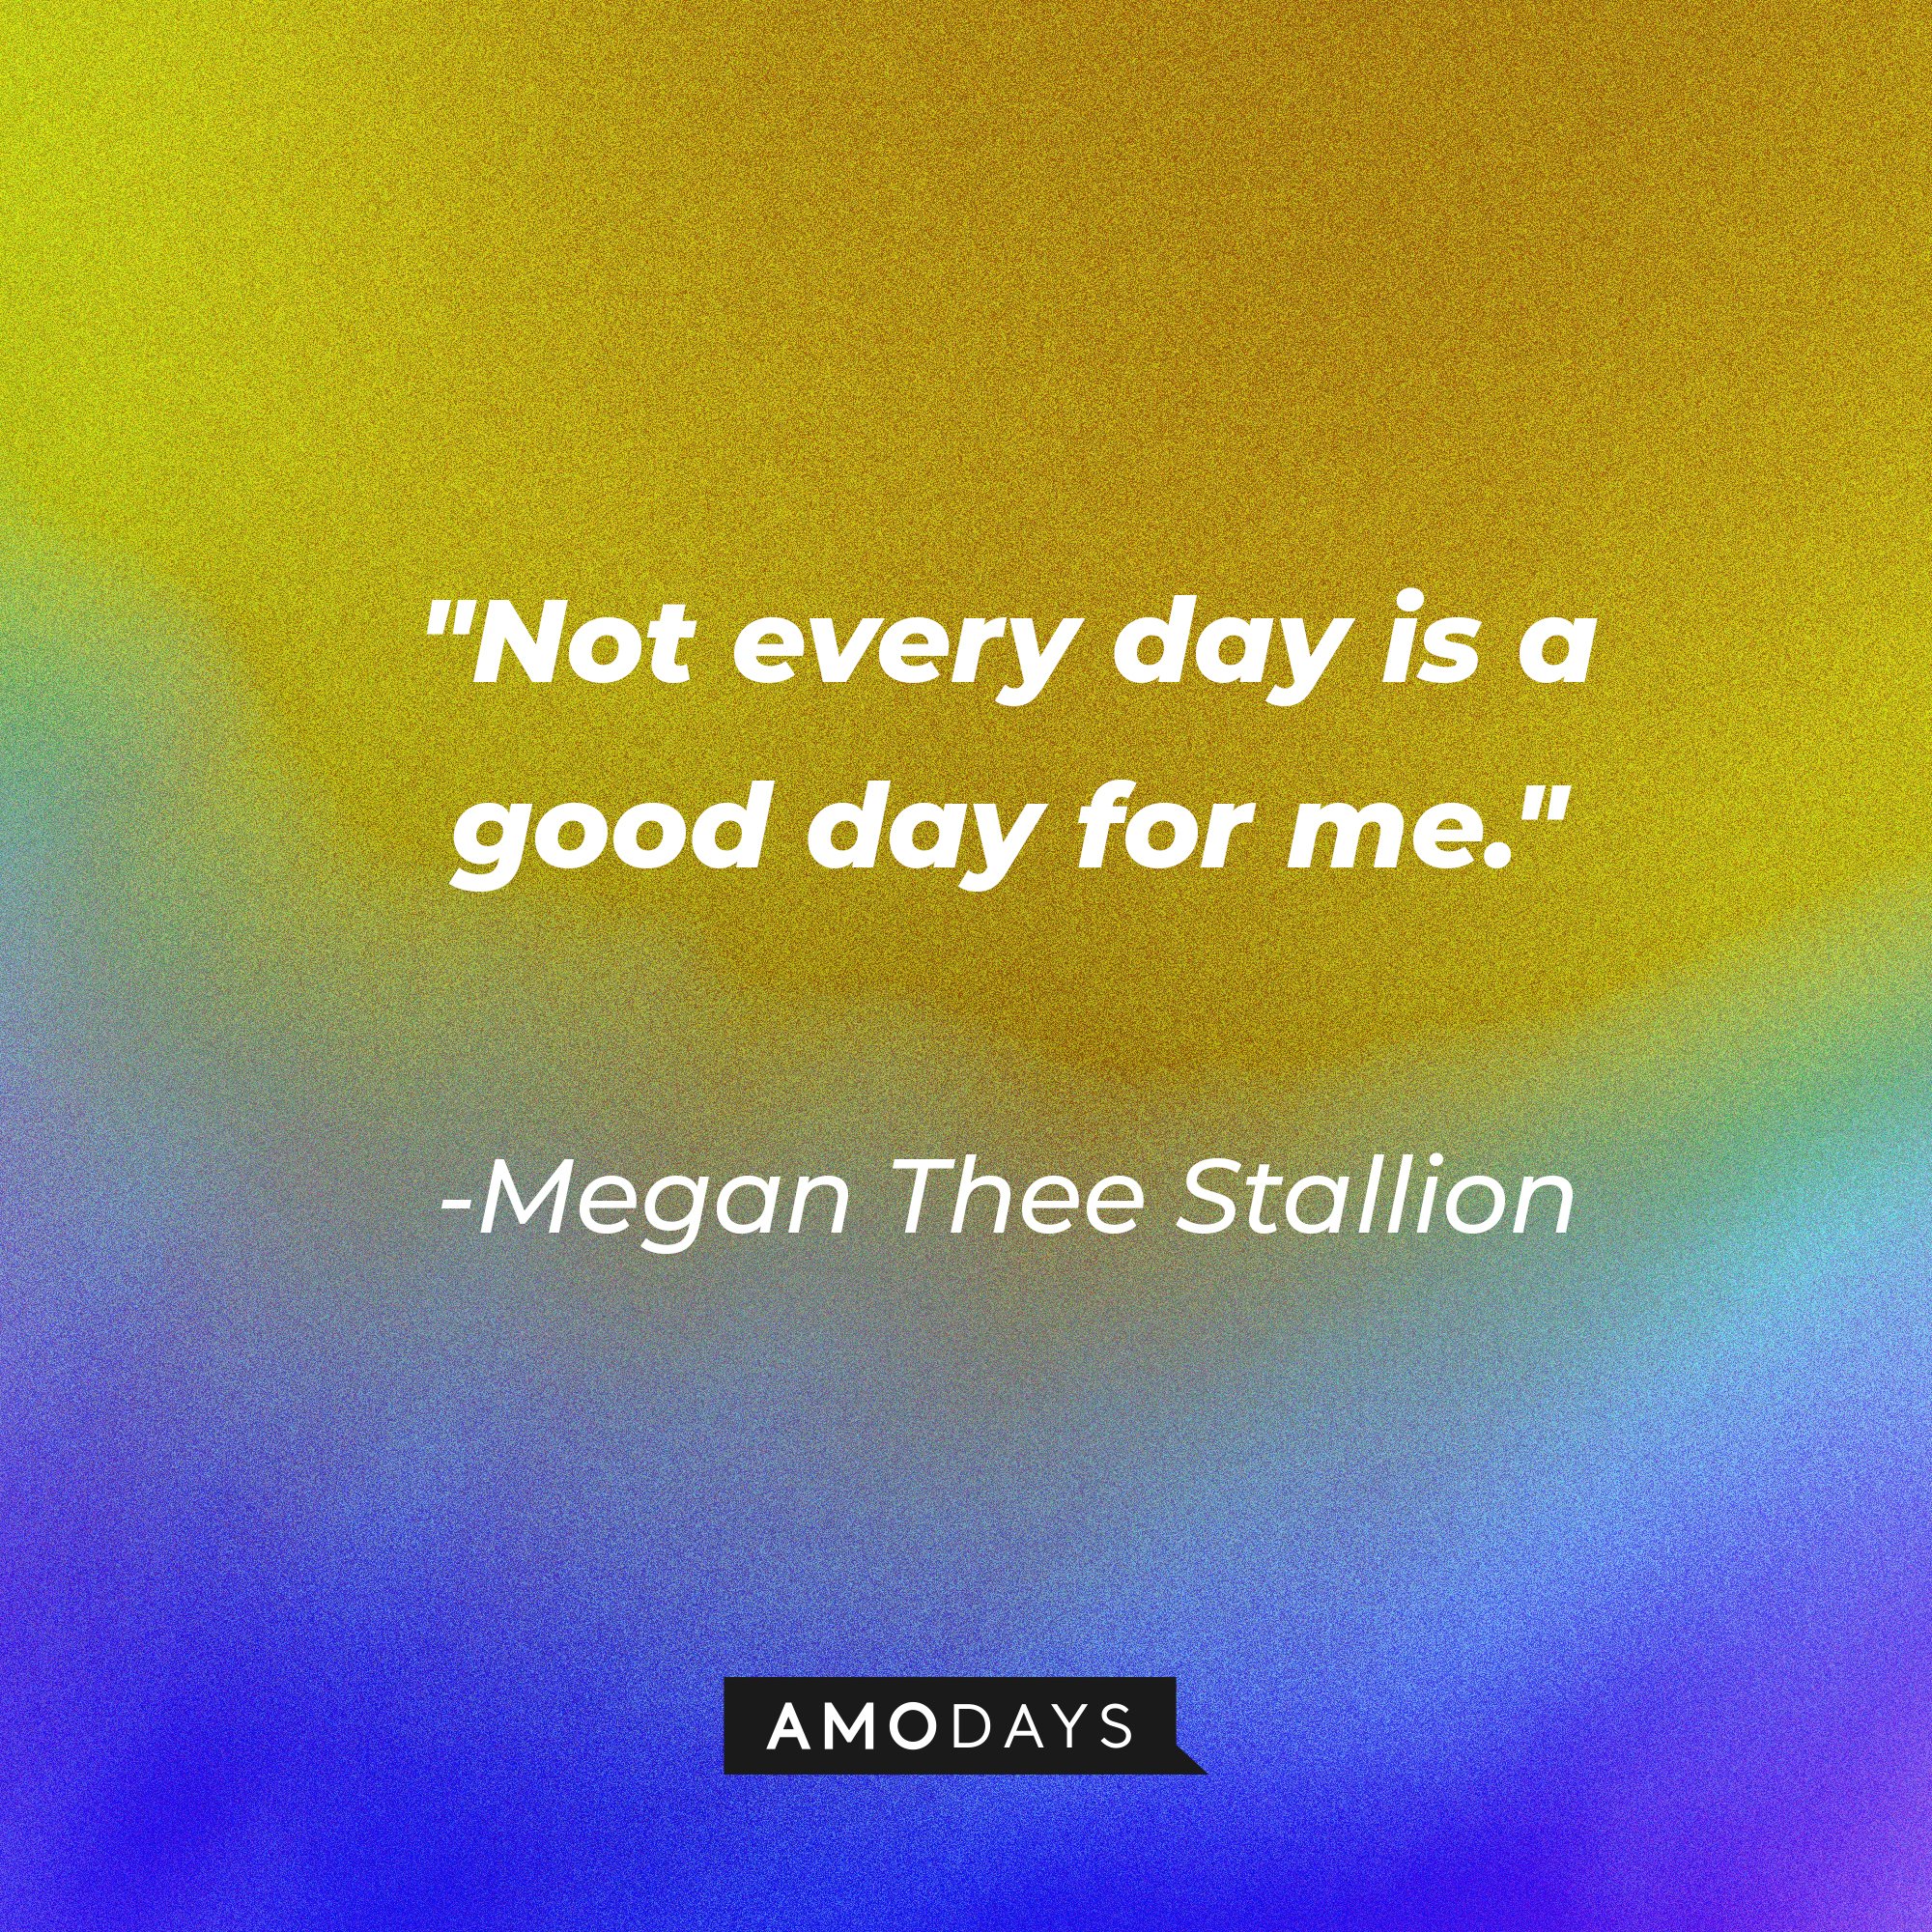 Megan Thee Stallion’s quote: "Not every day is a good day for me." | Image: AmoDays 